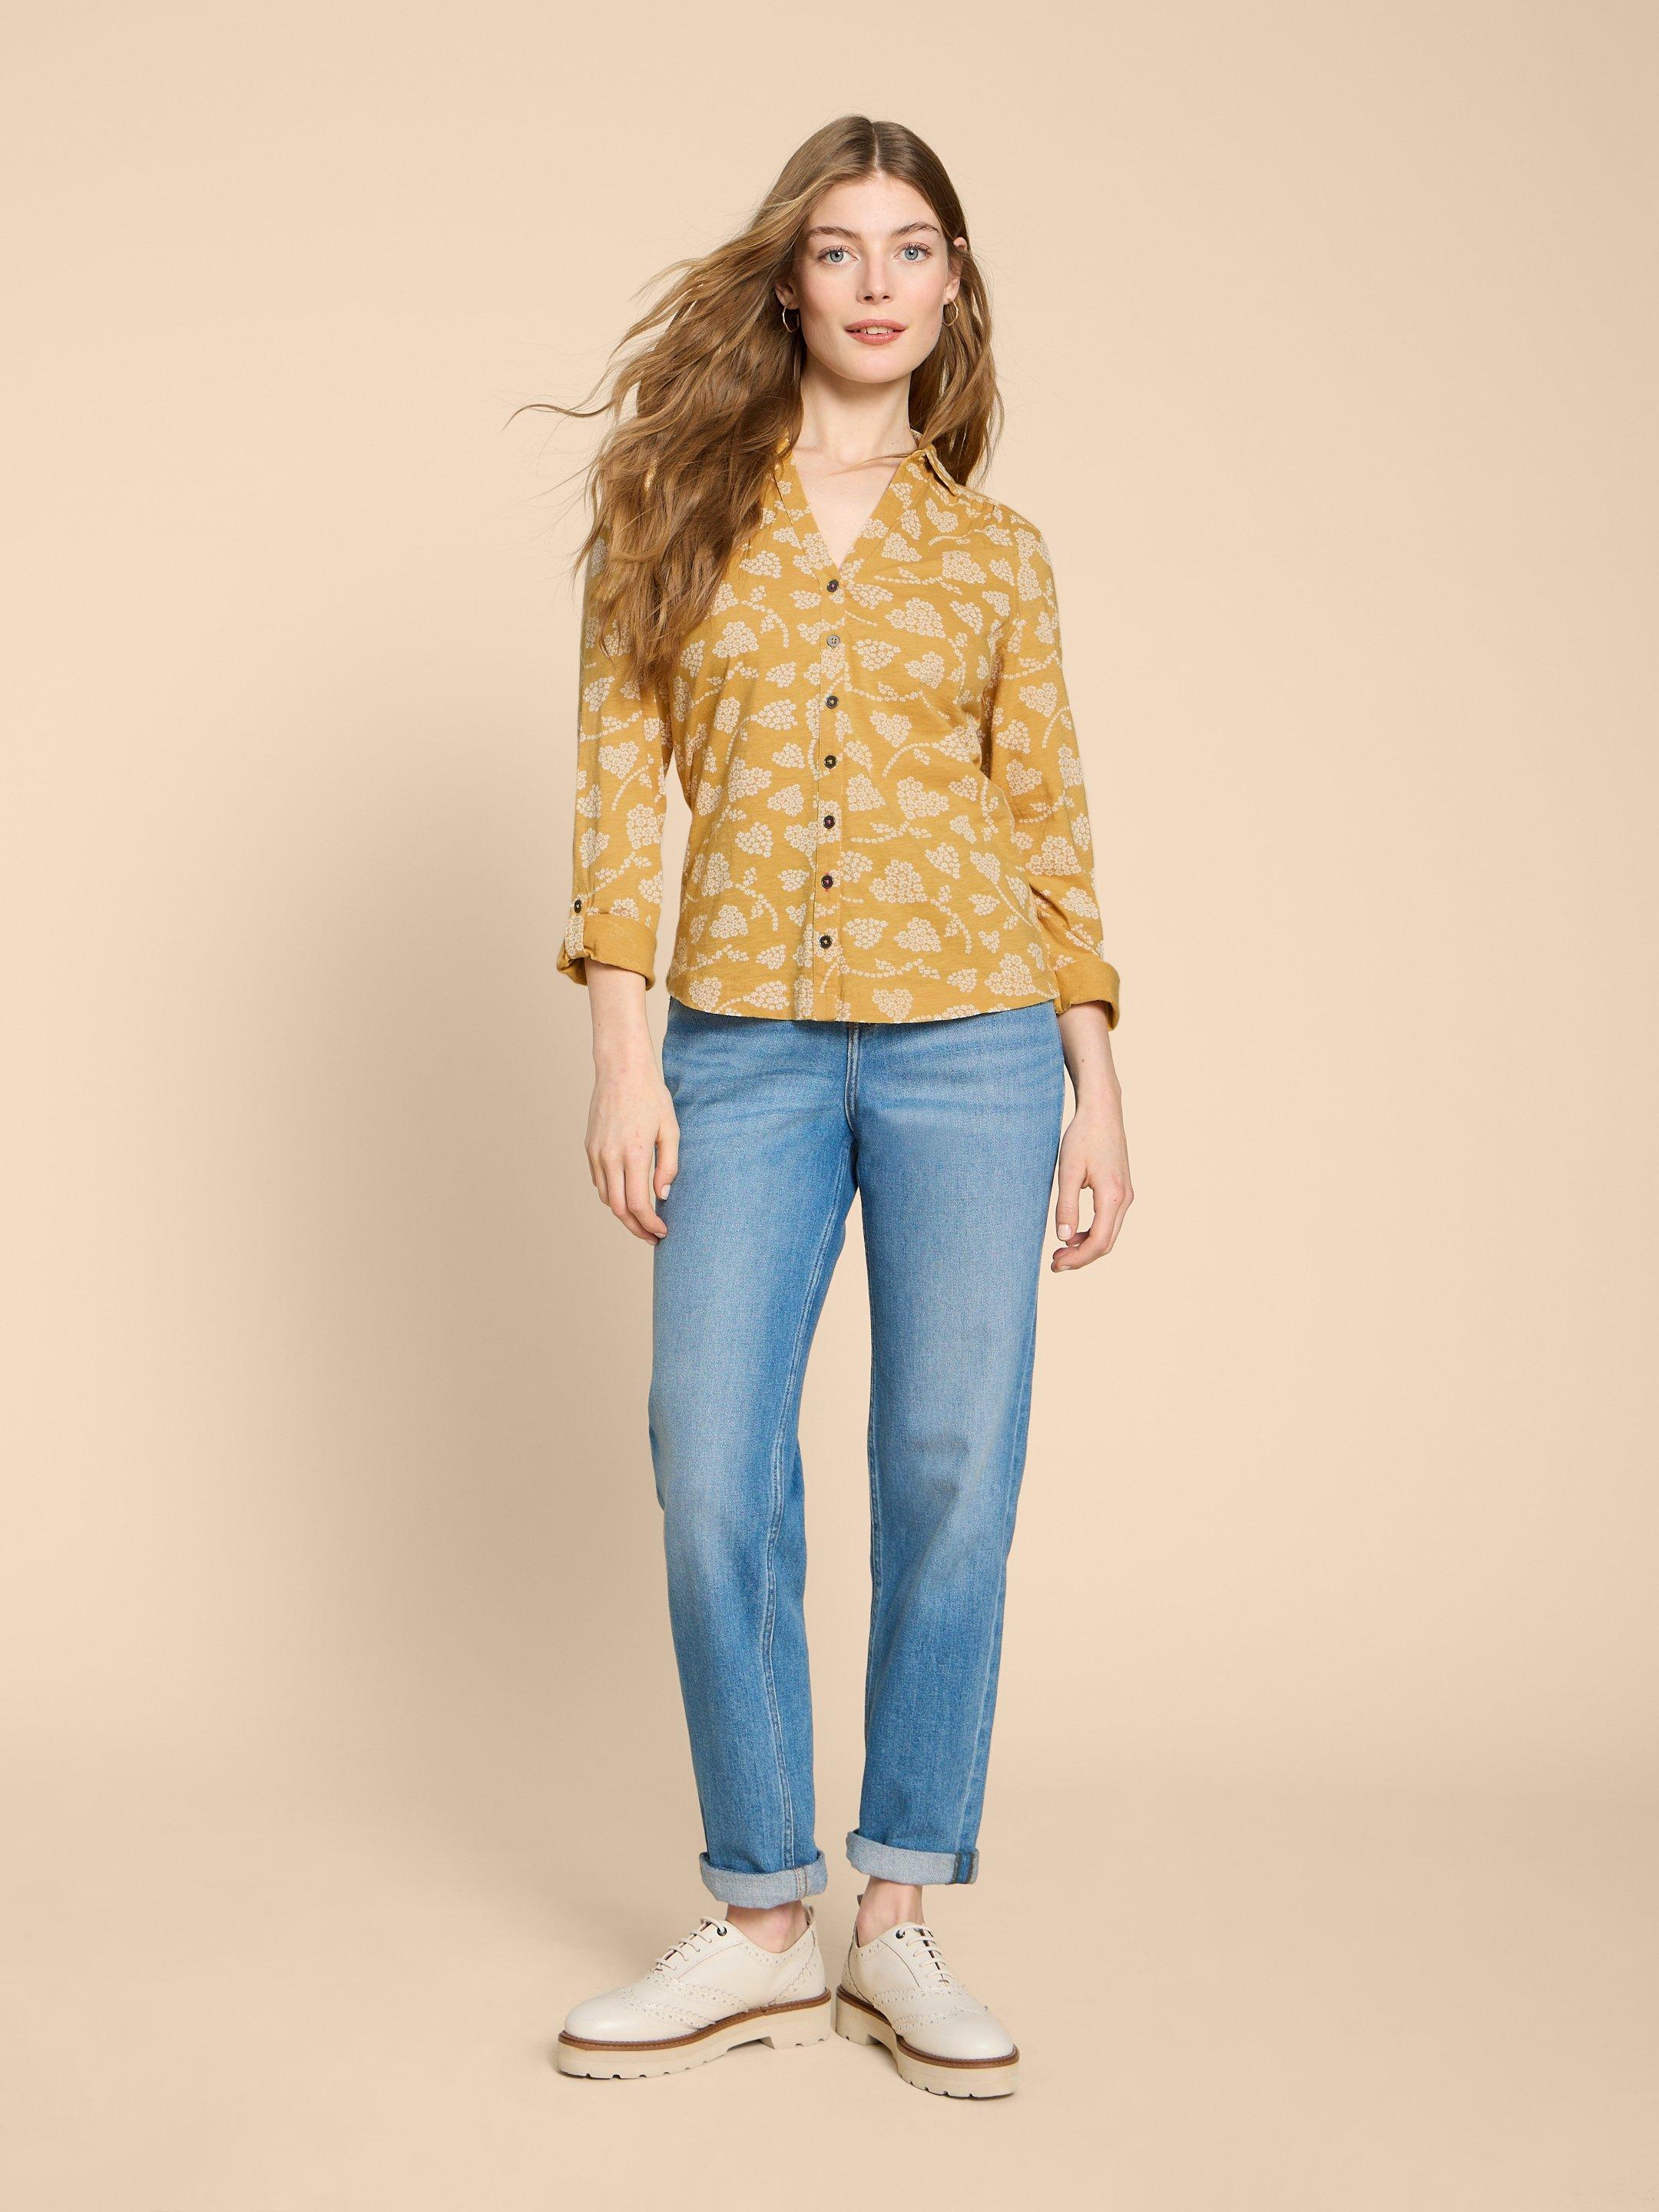 ANNIE JERSEY PRINT SHIRT in YELLOW PR - MODEL FRONT